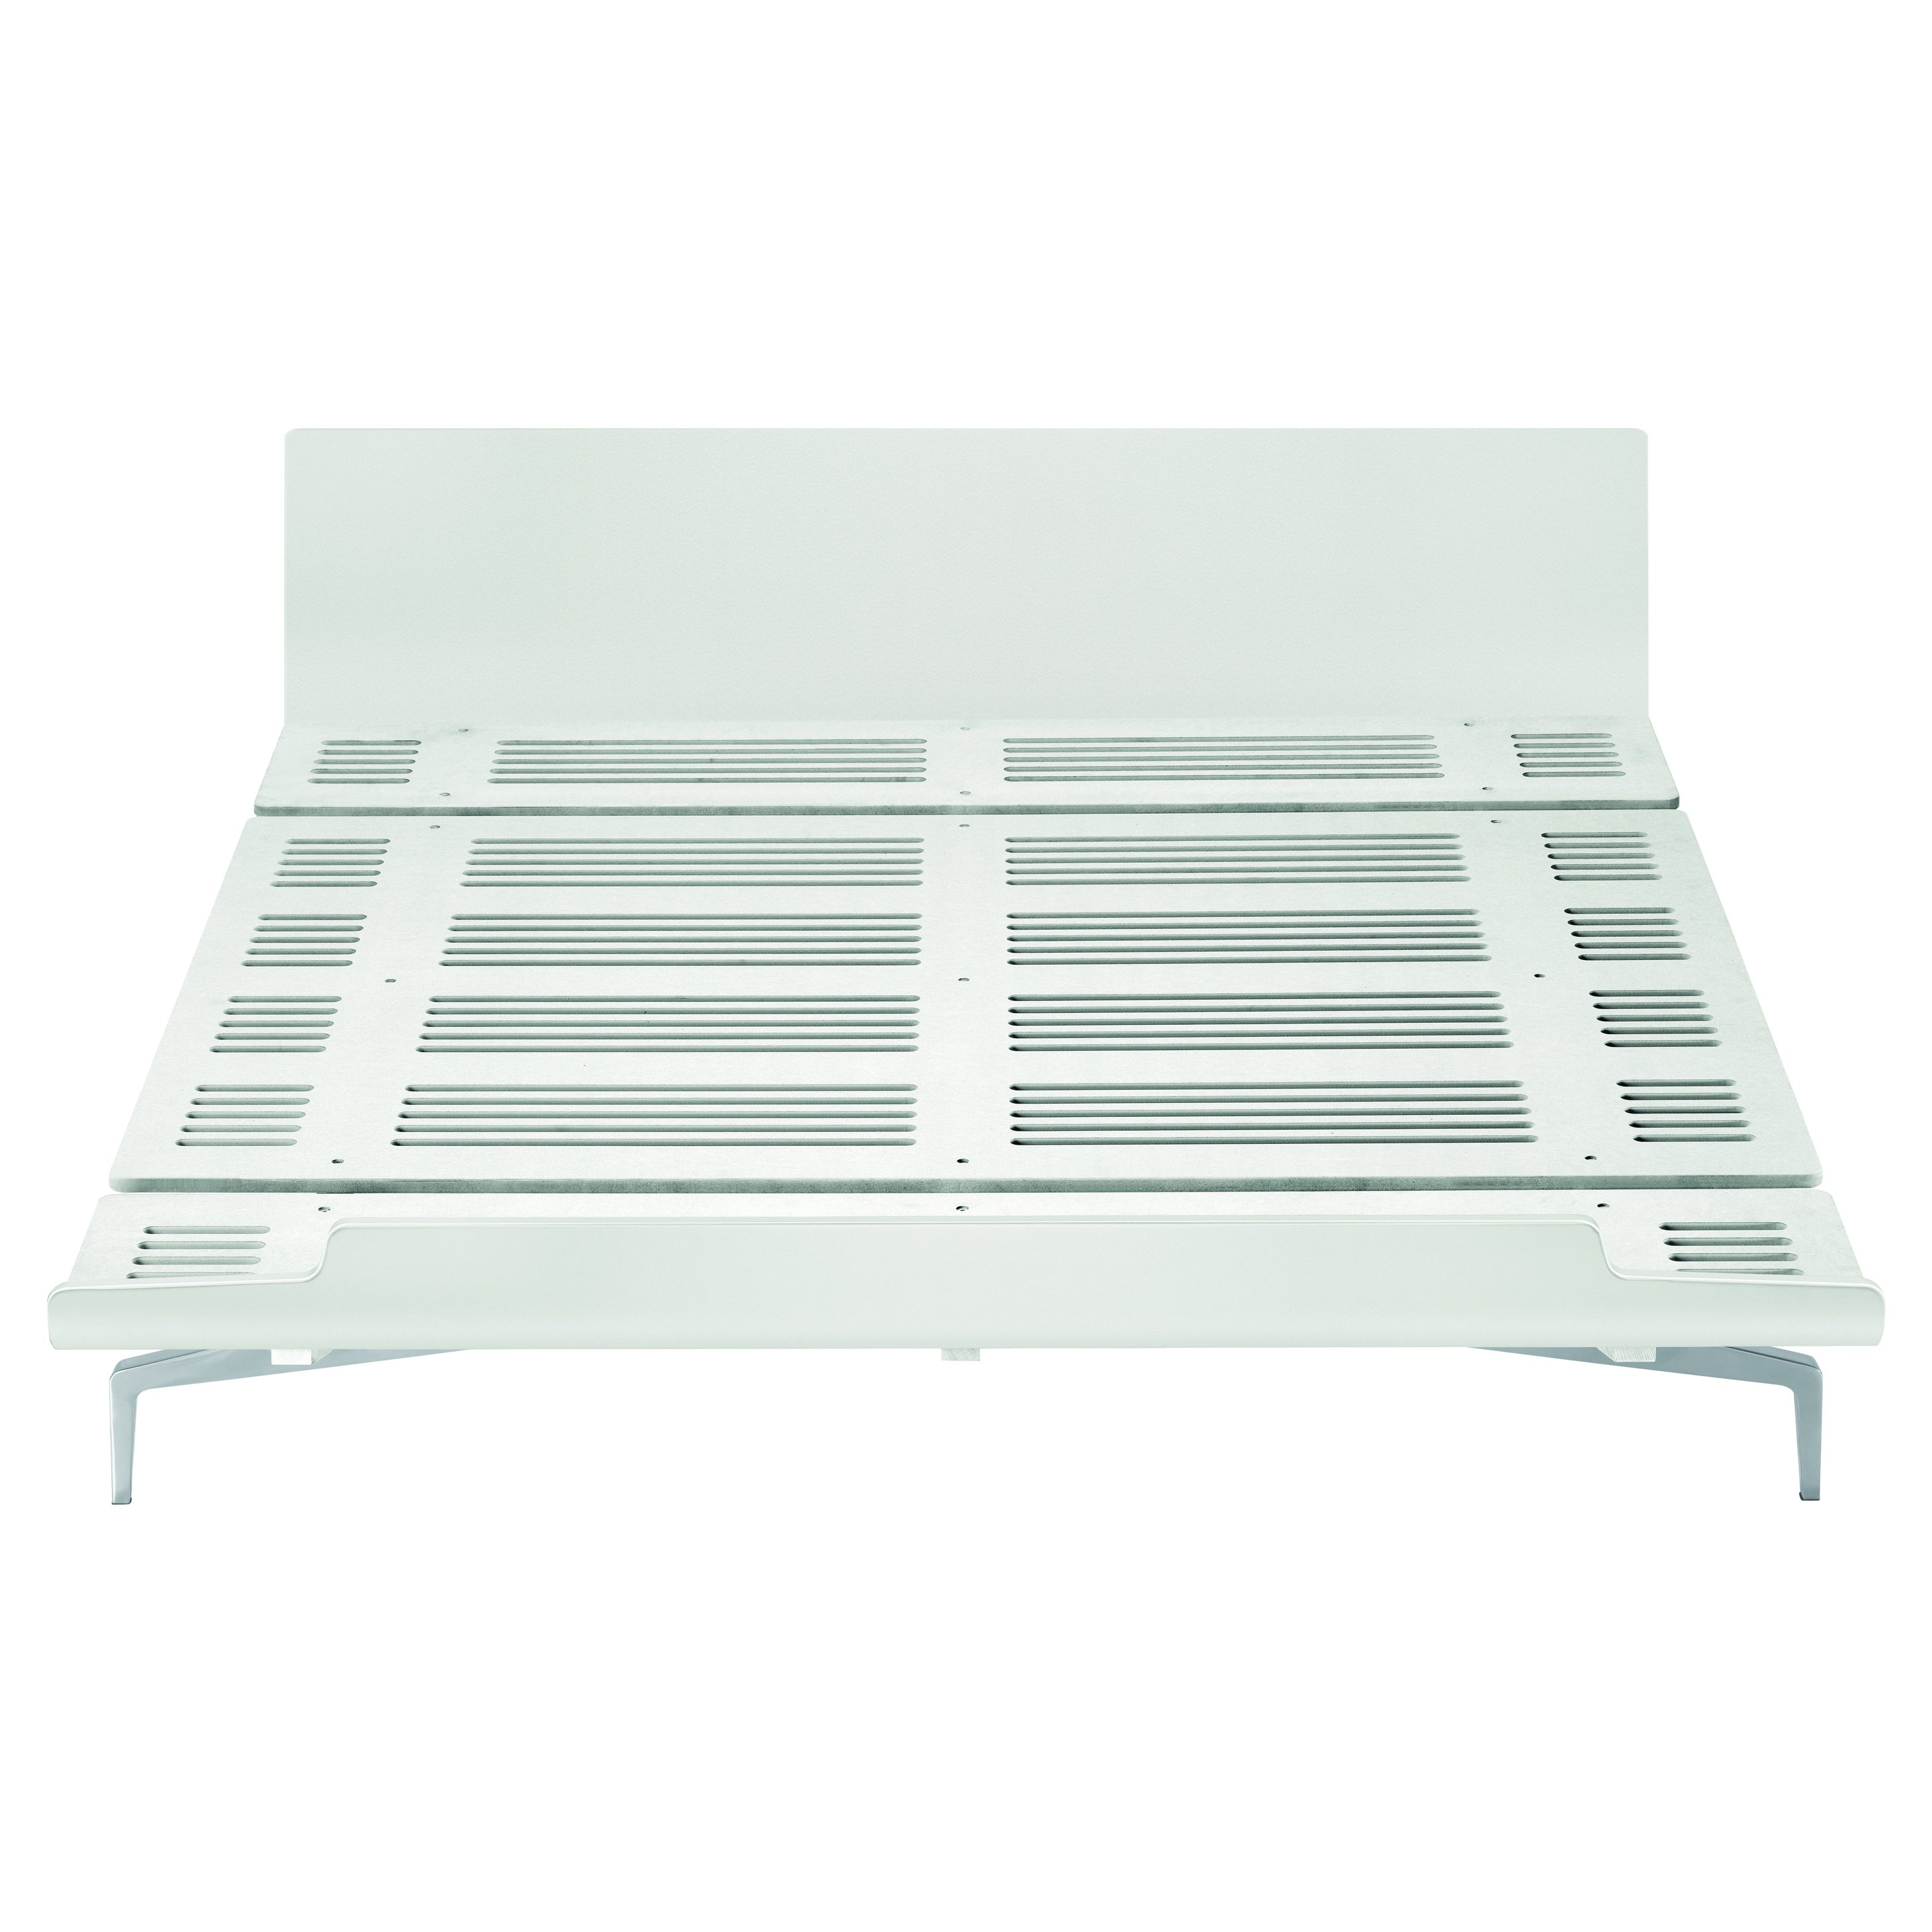 Alias LL4 Legnoletto Bed in White Matt Lacquer with Polished Aluminum Legs For Sale